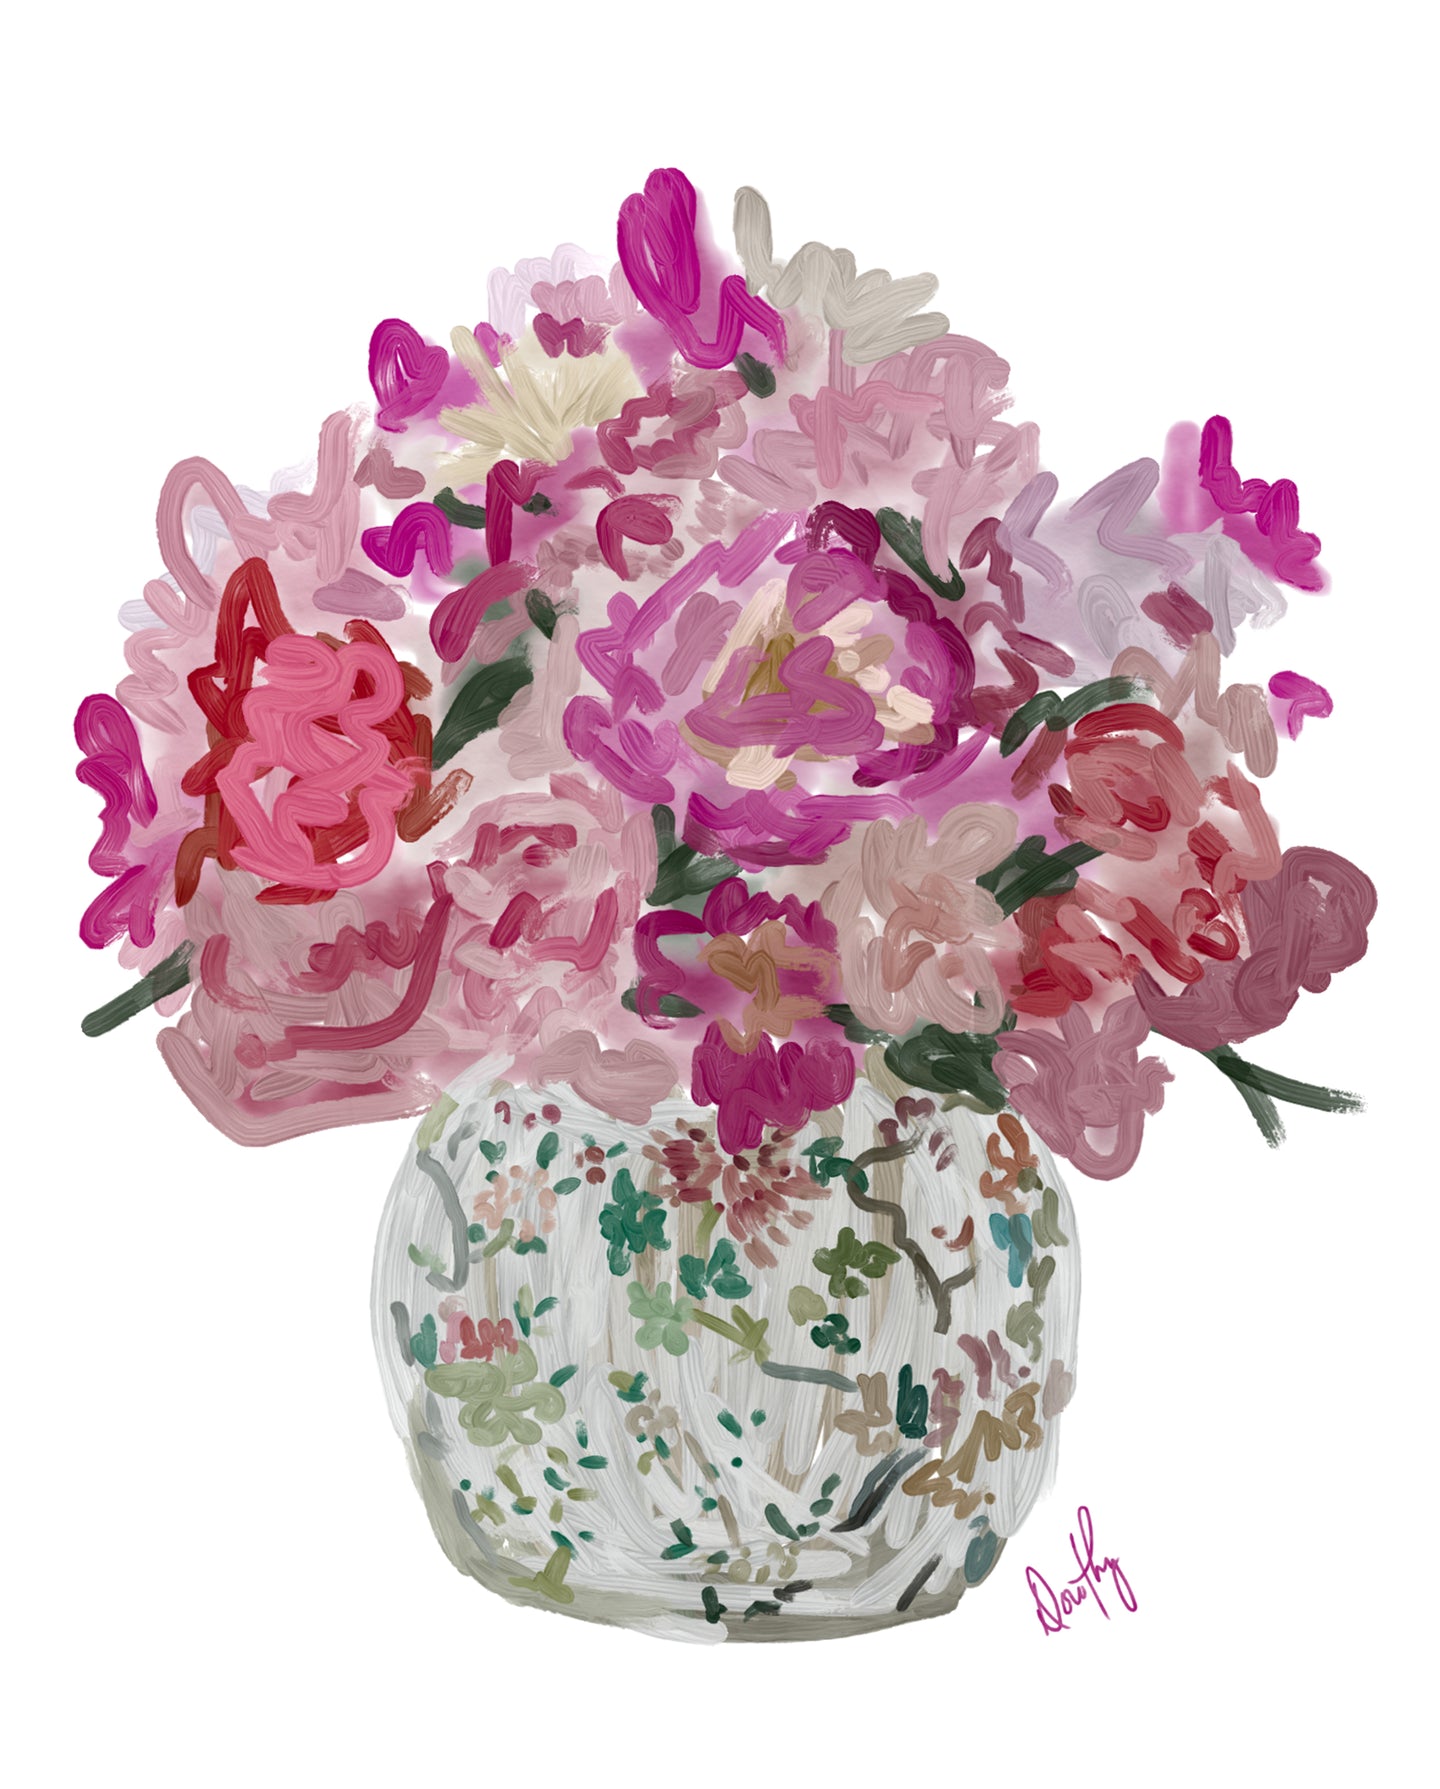 Chinoiserie Florals 2 - Dorothy Art